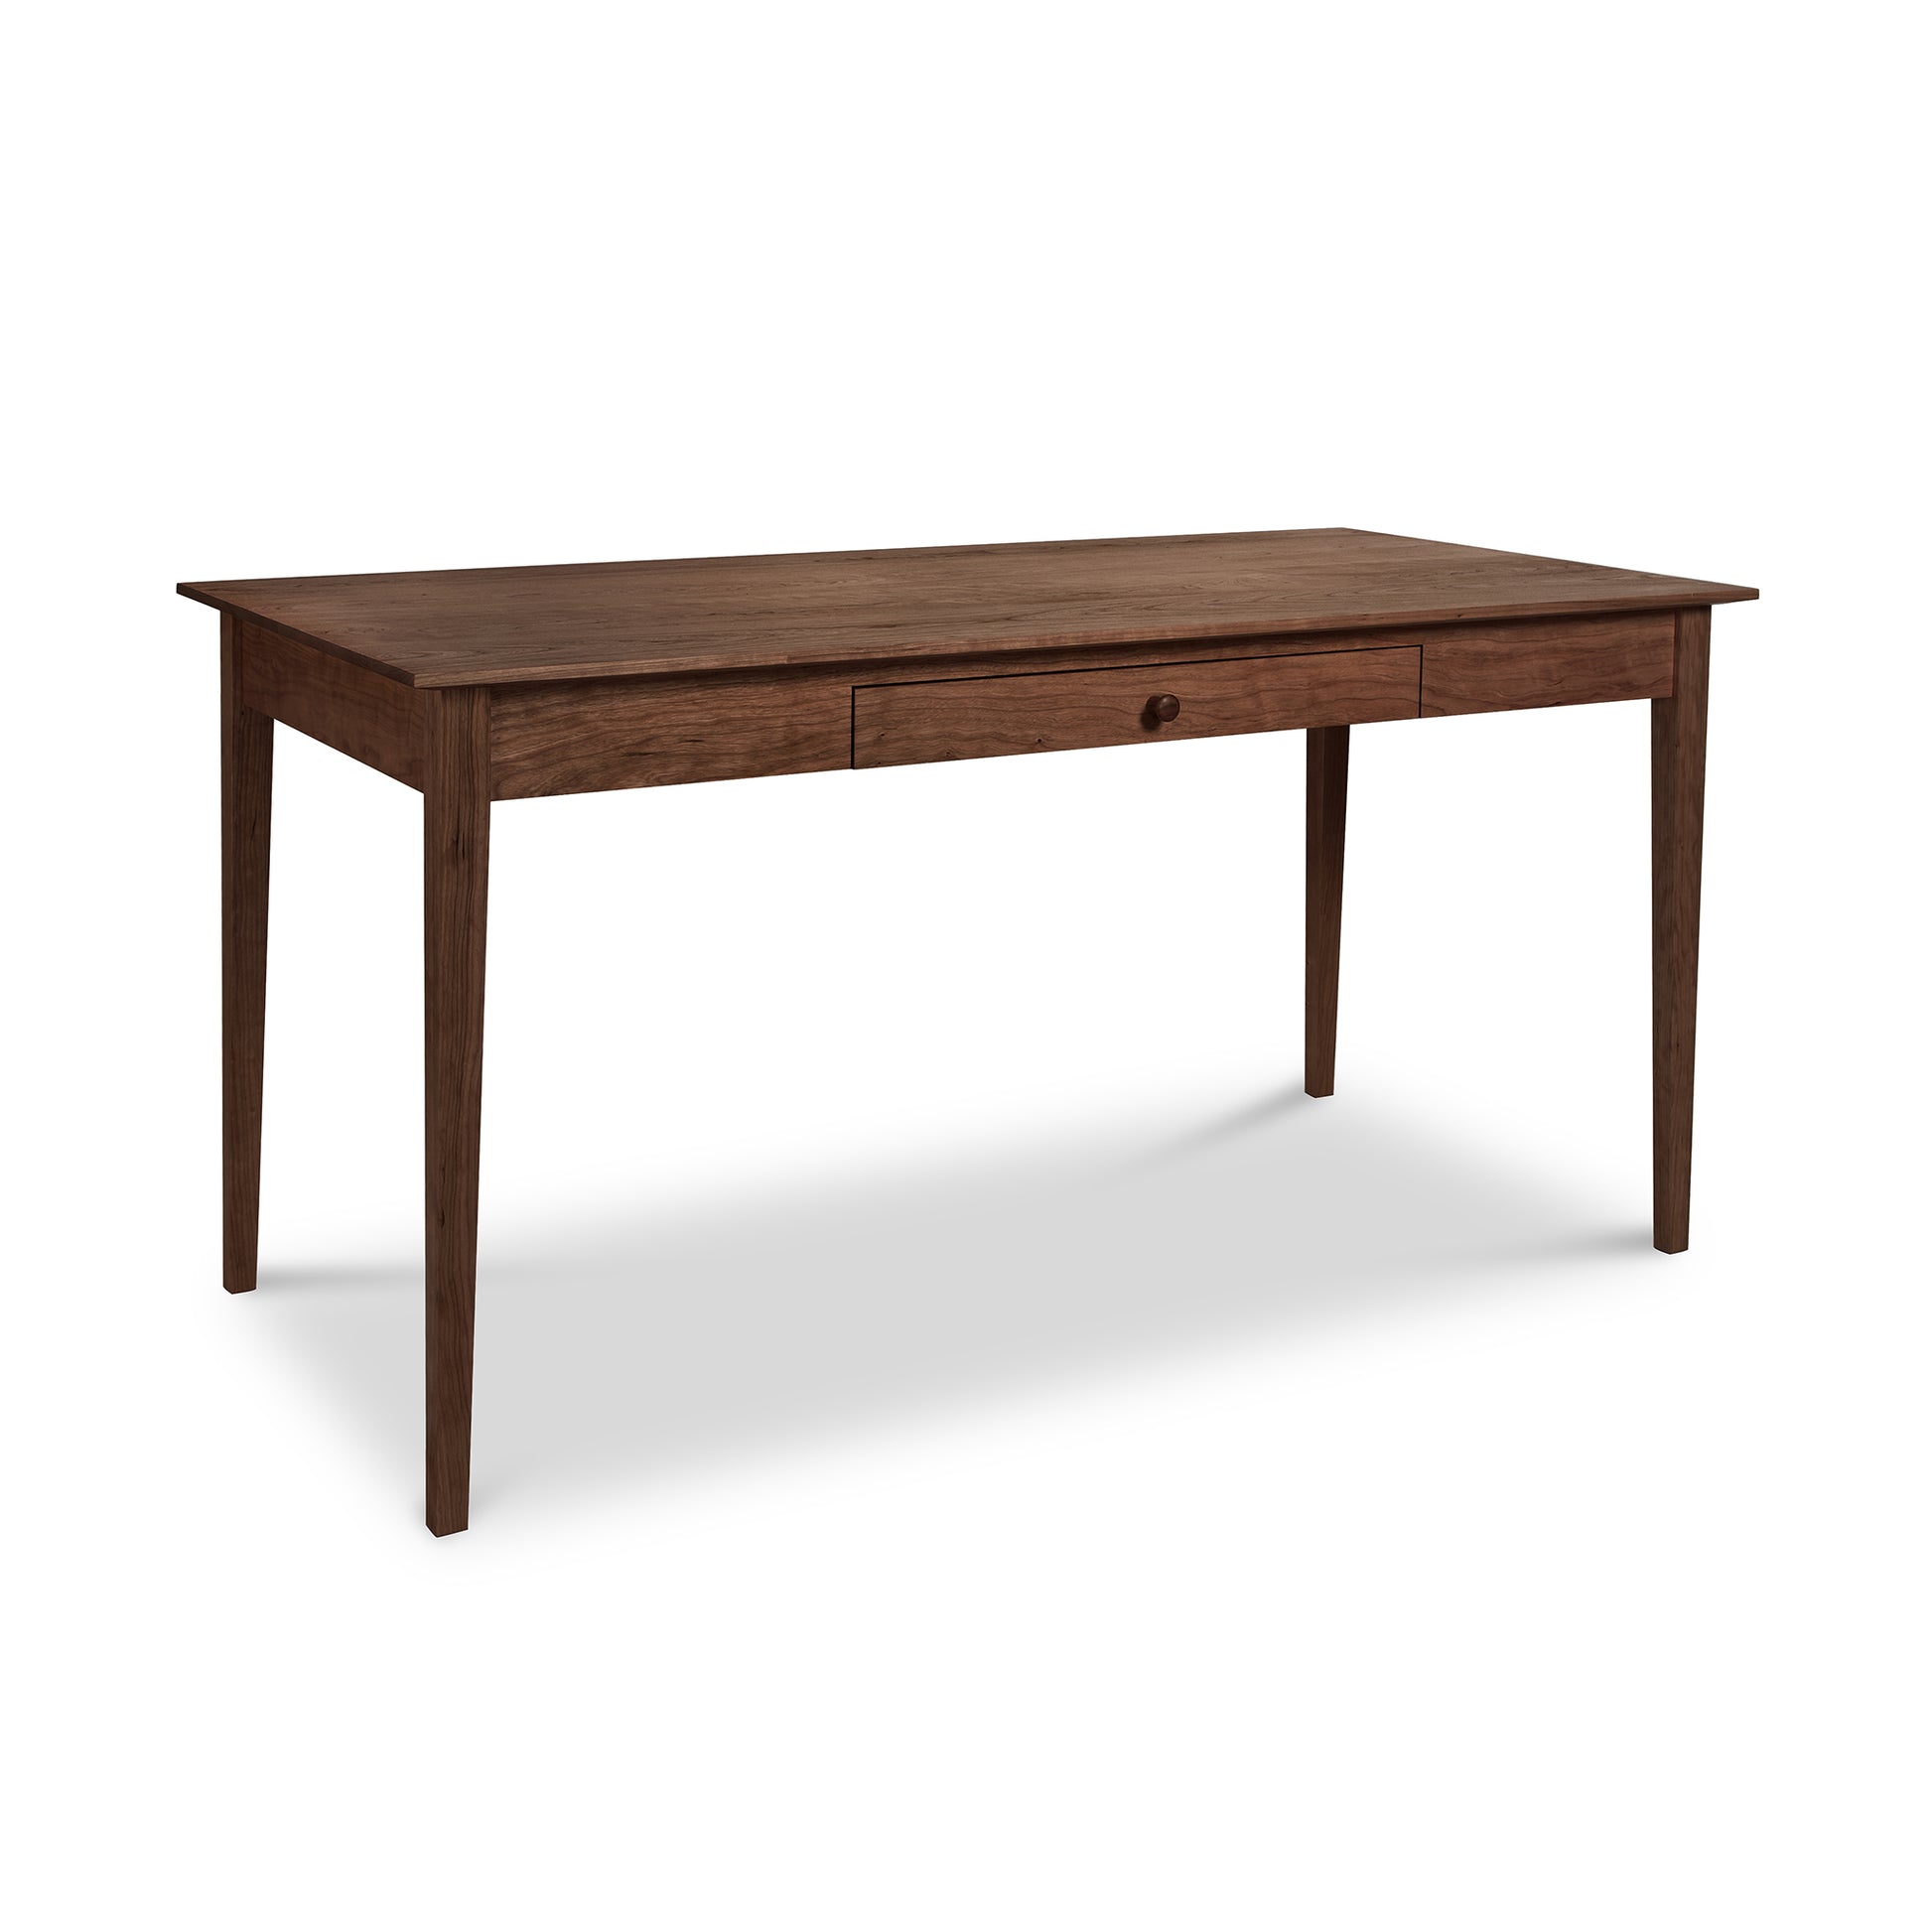 An Maple Corner Woodworks American Shaker writing desk, handmade from sustainably harvested hardwood, with a single drawer, set against a white background.